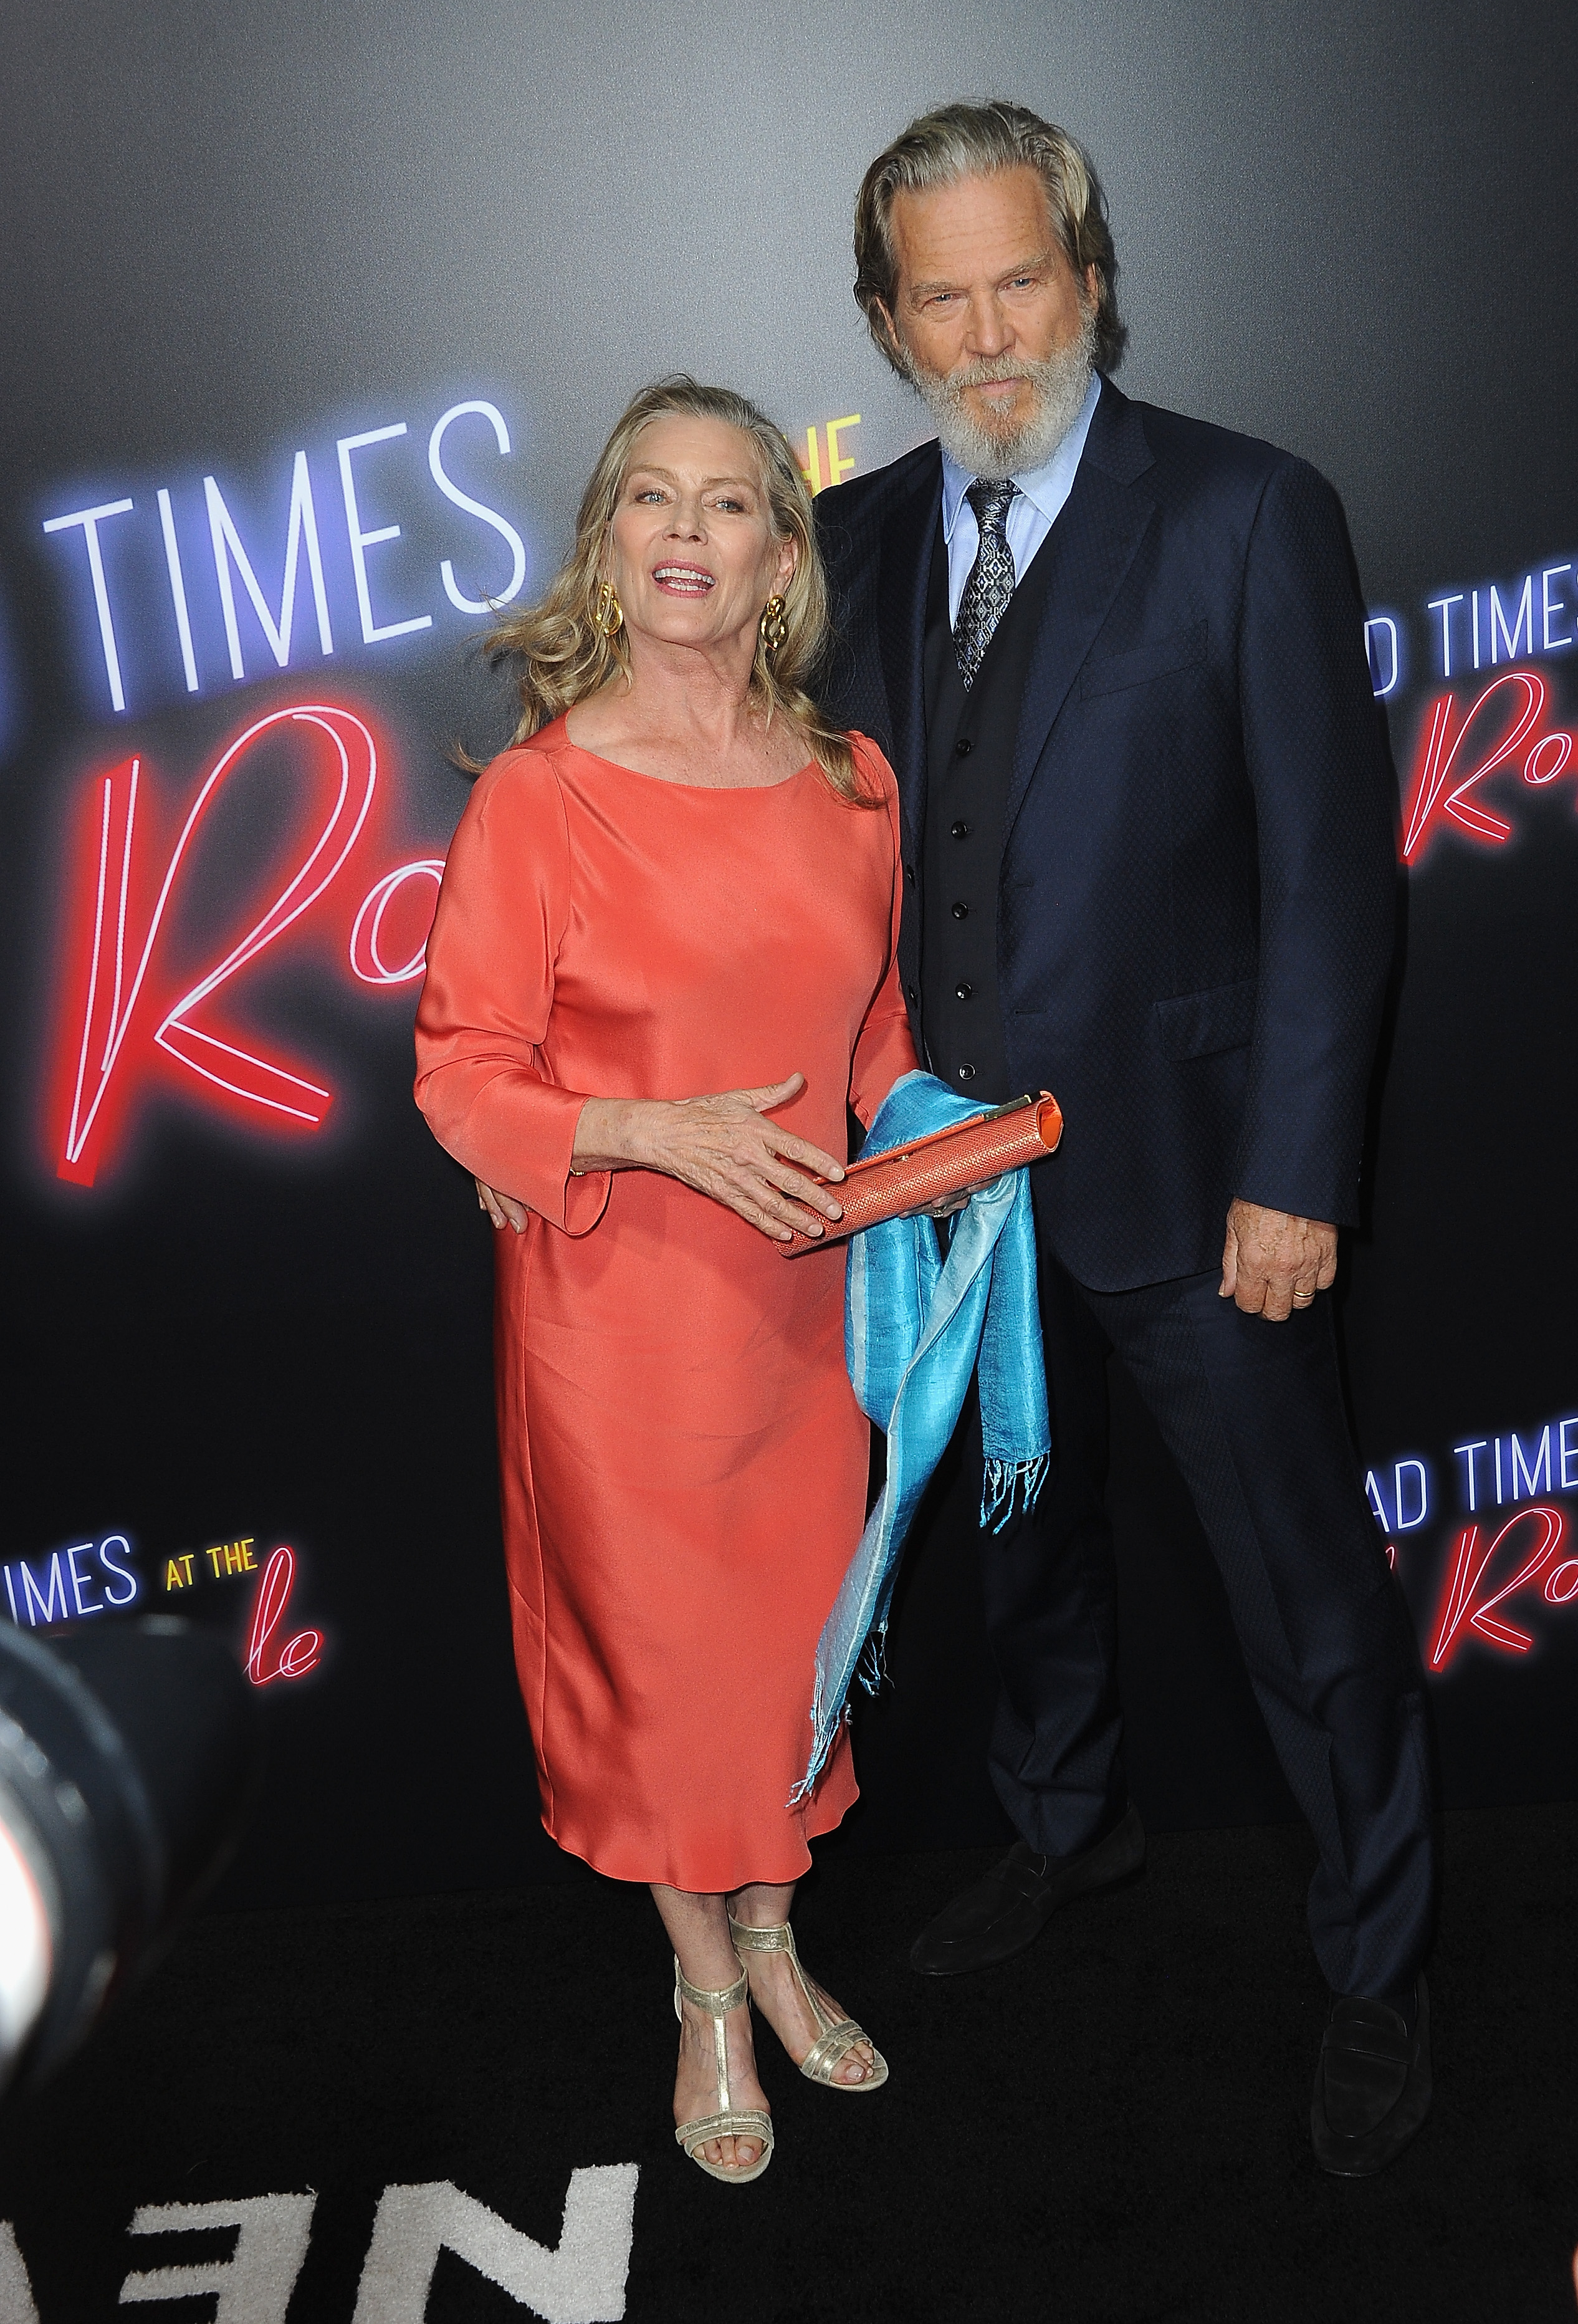 Susan and Jeff Bridges at the premiere of "Bad Times at The El Royale" on September 22, 2018, in Hollywood, California | Source: Getty Images